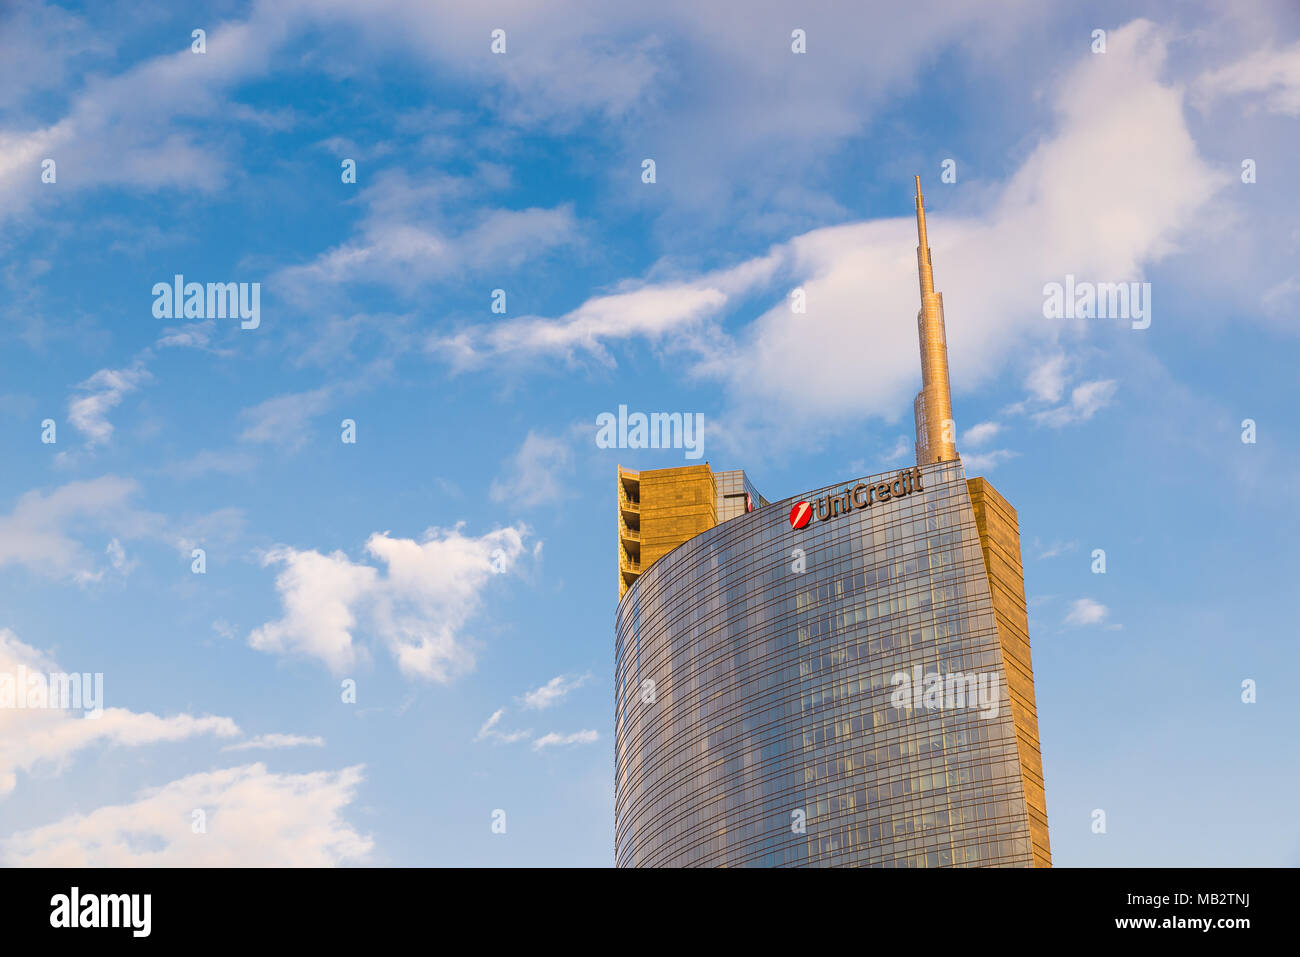 Milan, Italy - February 17, 2017:  Unicredit tower,  the tallest skyscraper in Italy, headquarters of the Unicredit offices at piazza Gae Aulenti Stock Photo